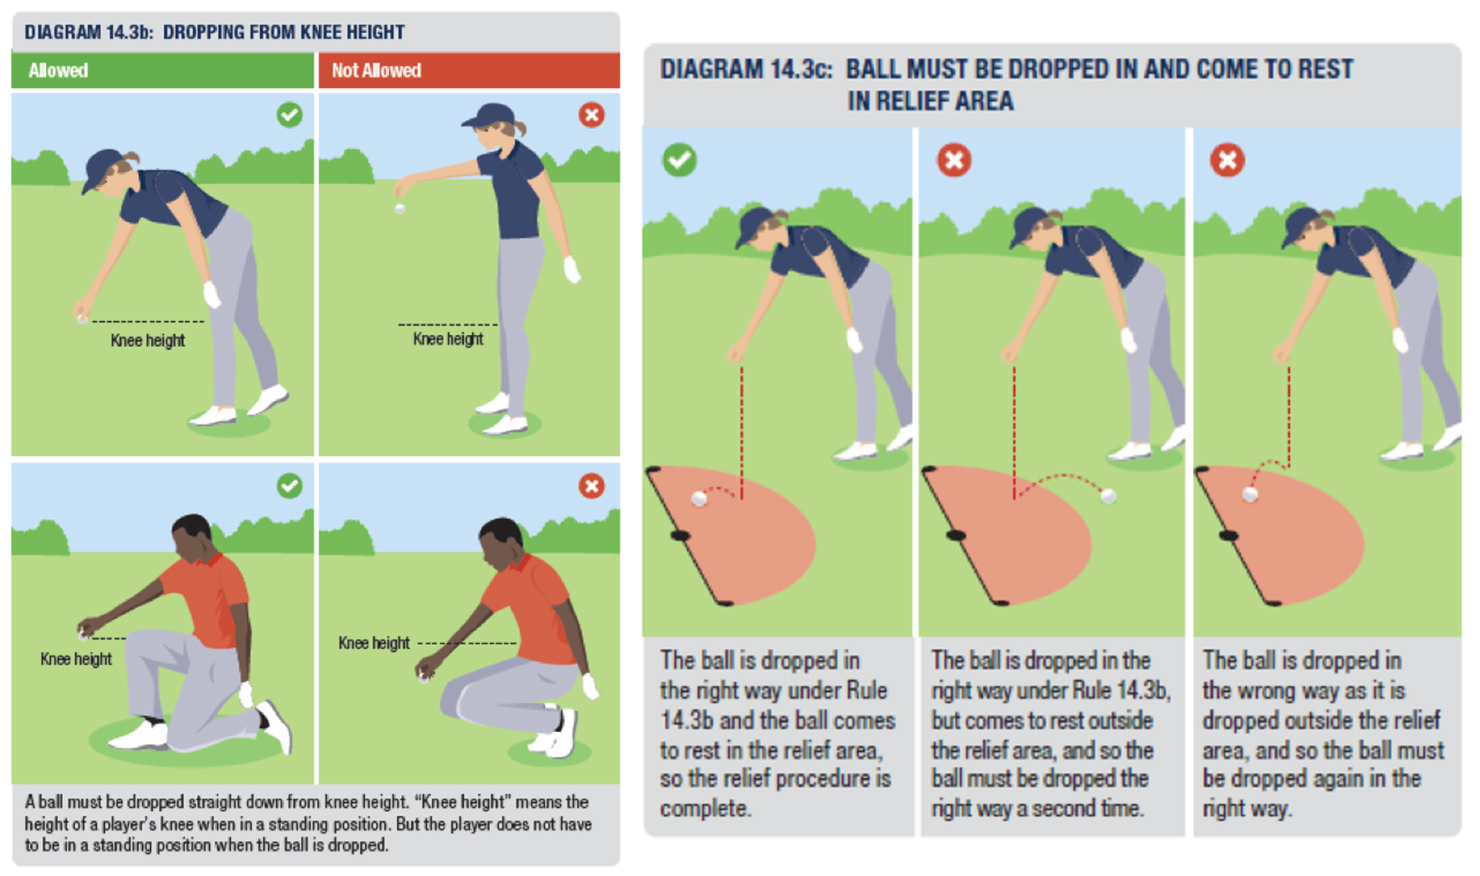 Lifting and replacing your ball (Rule 14.1 and 14.2)